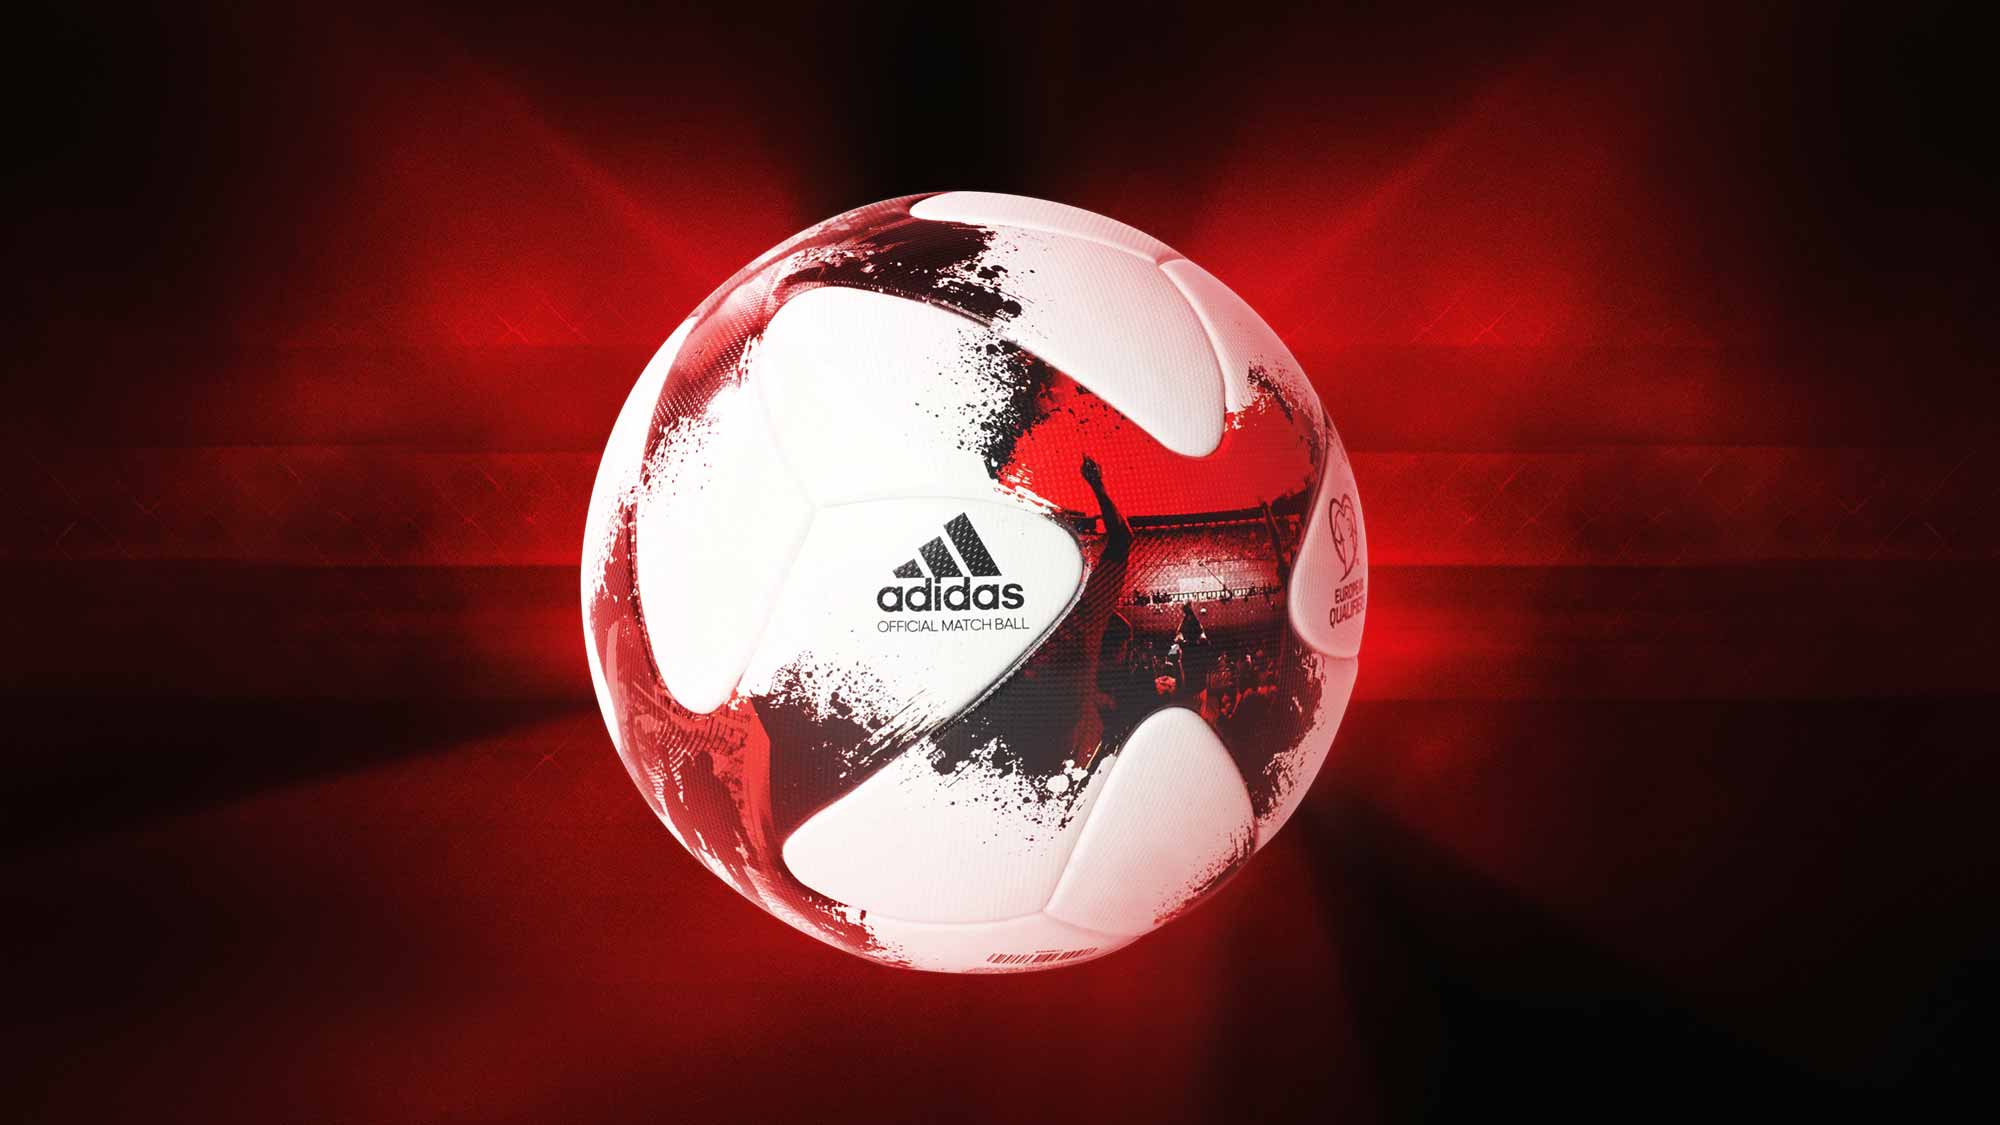 Russia 2018 World Cup wallpaper and picture of the World